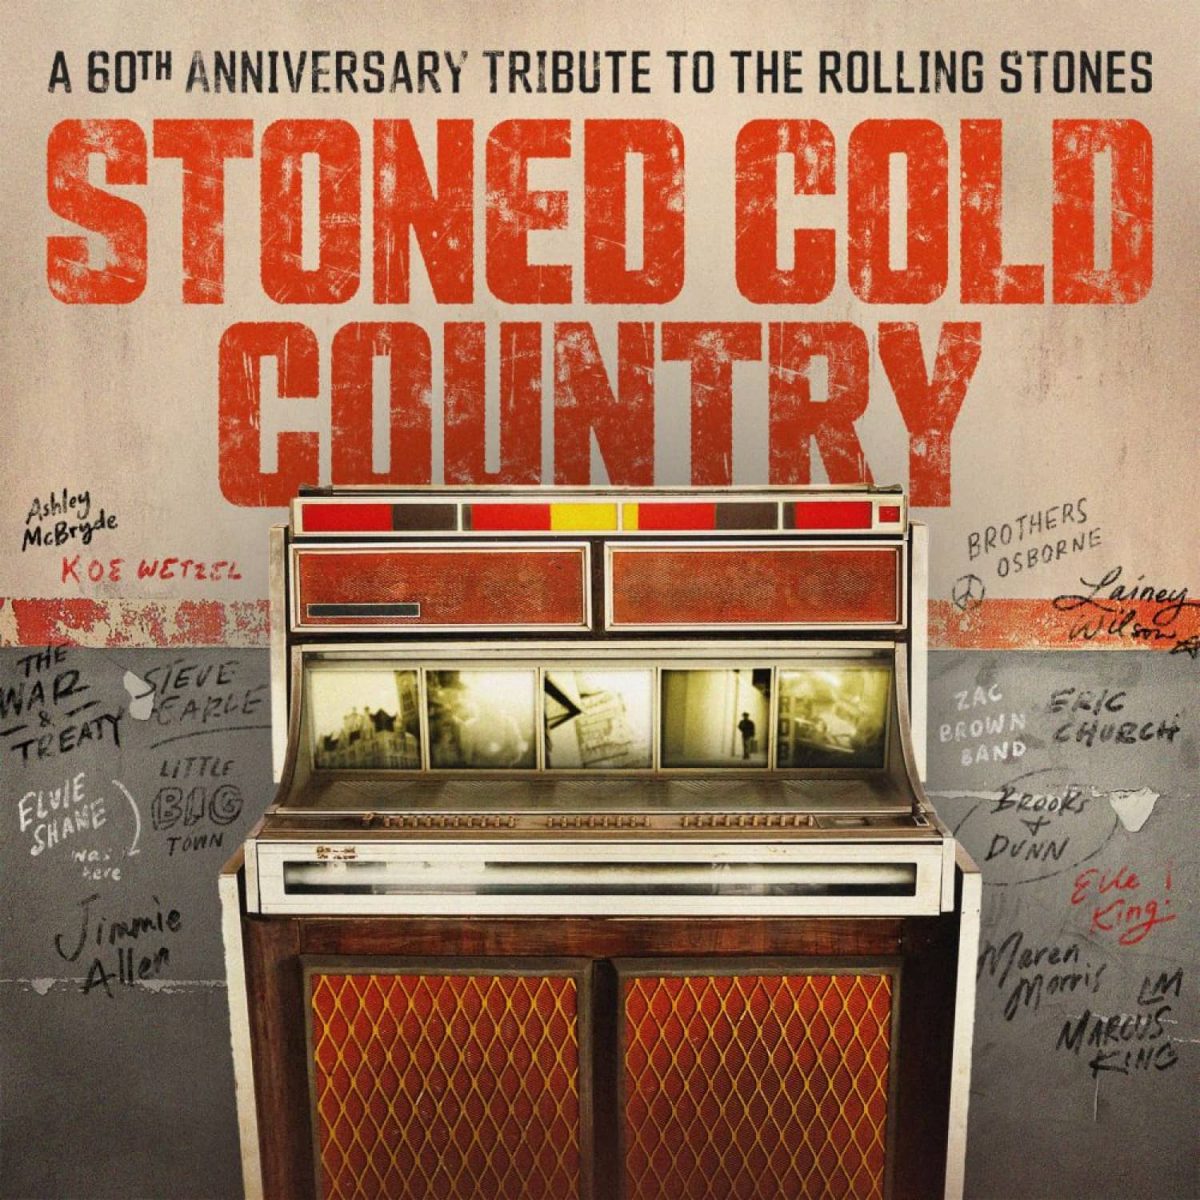 Stoned Cold Country - A 60th Anniversary Tribute Album to The Rolling Stones